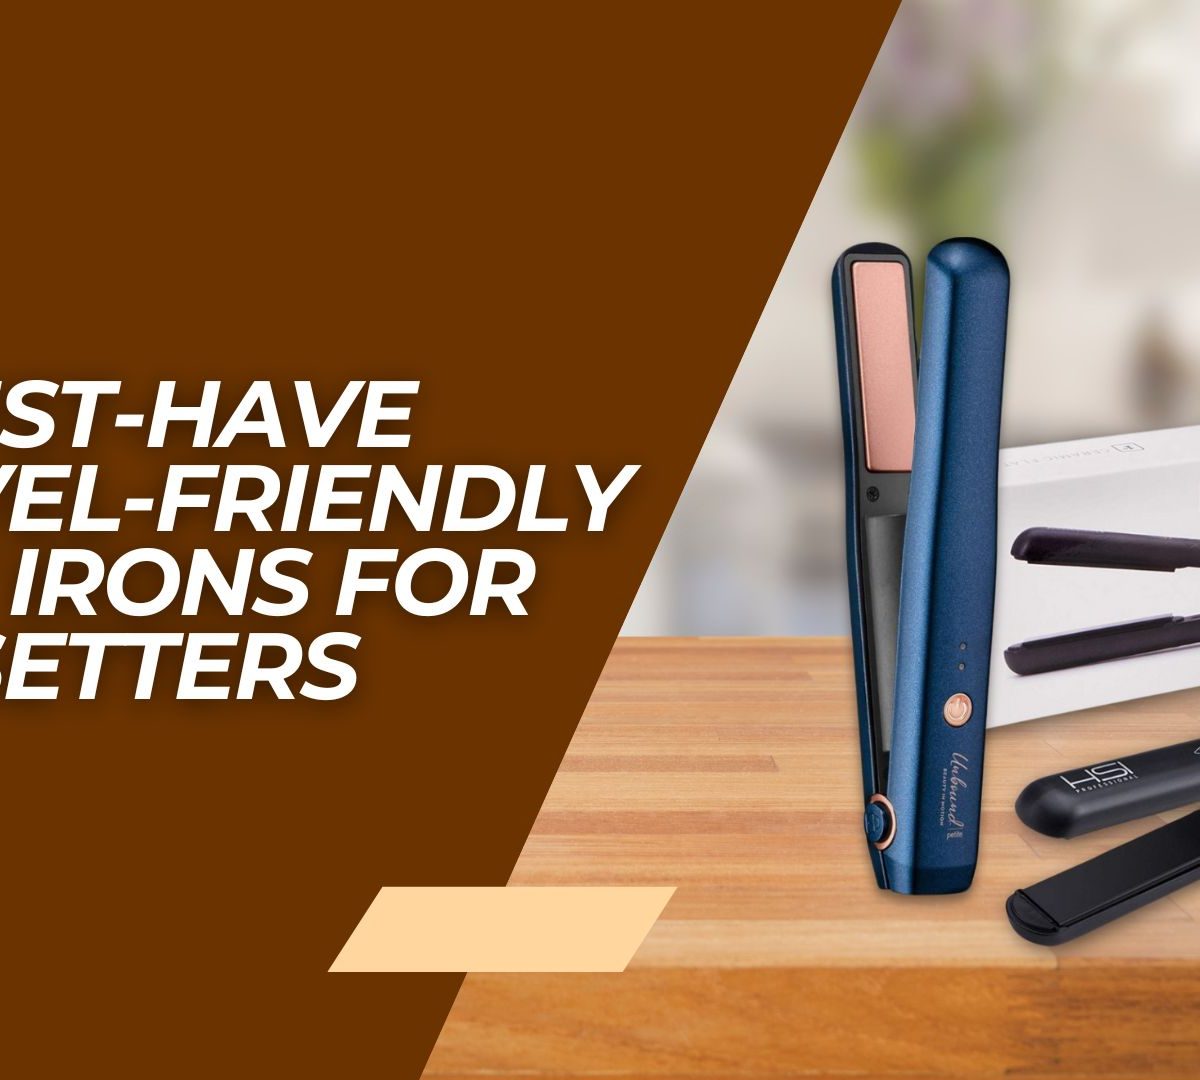 Top 10 Travel-Friendly Flat Irons for Jet-Setters